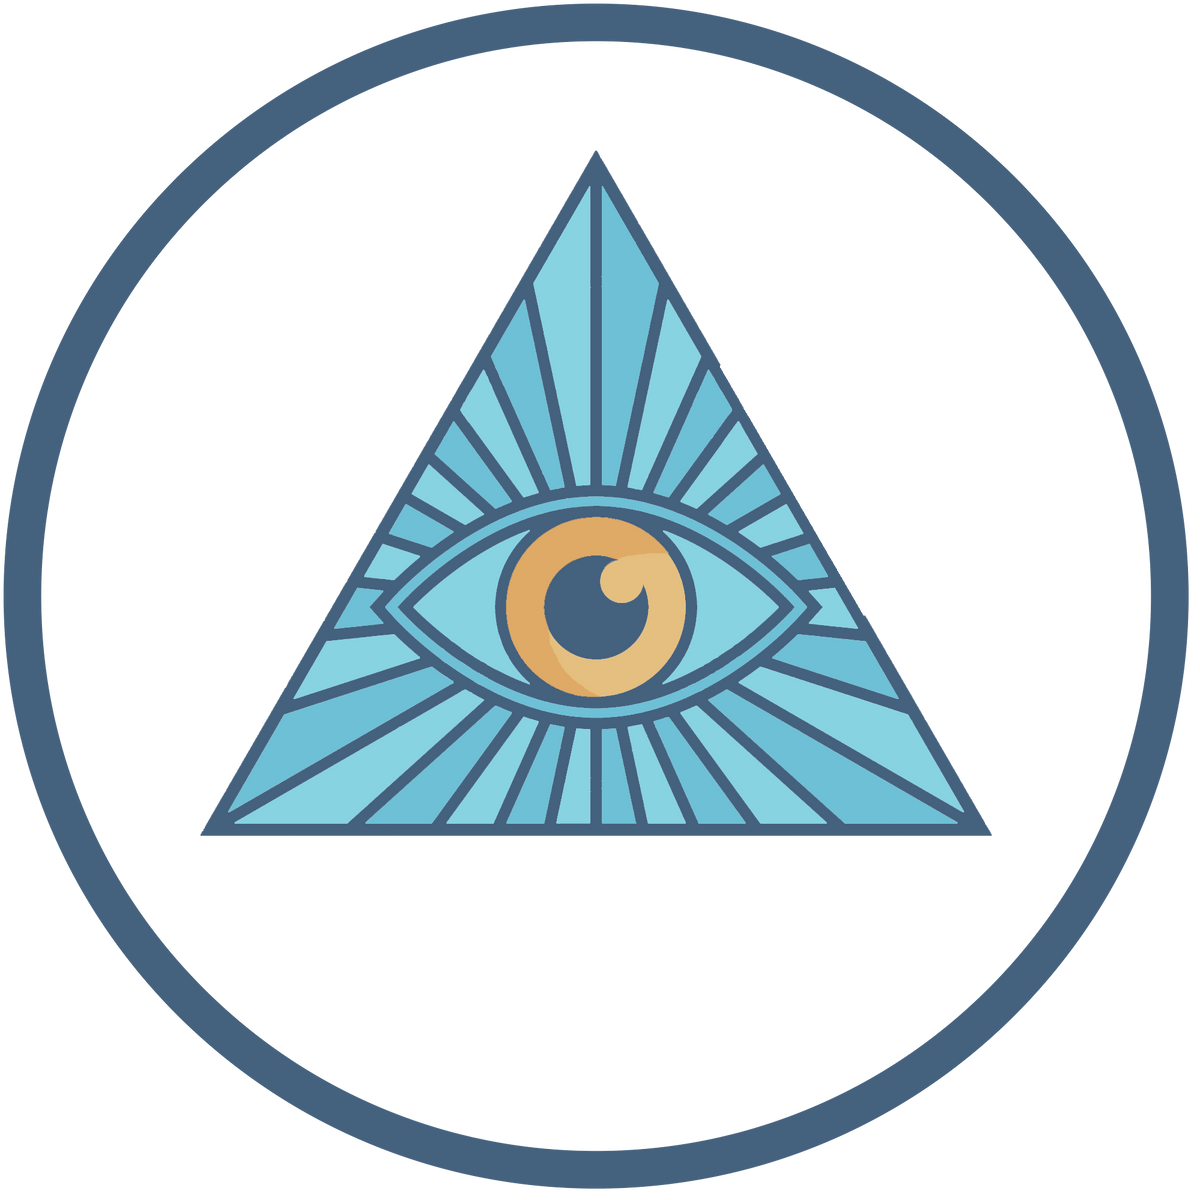 All Seeing Eye Symbol The Ancient Symbol